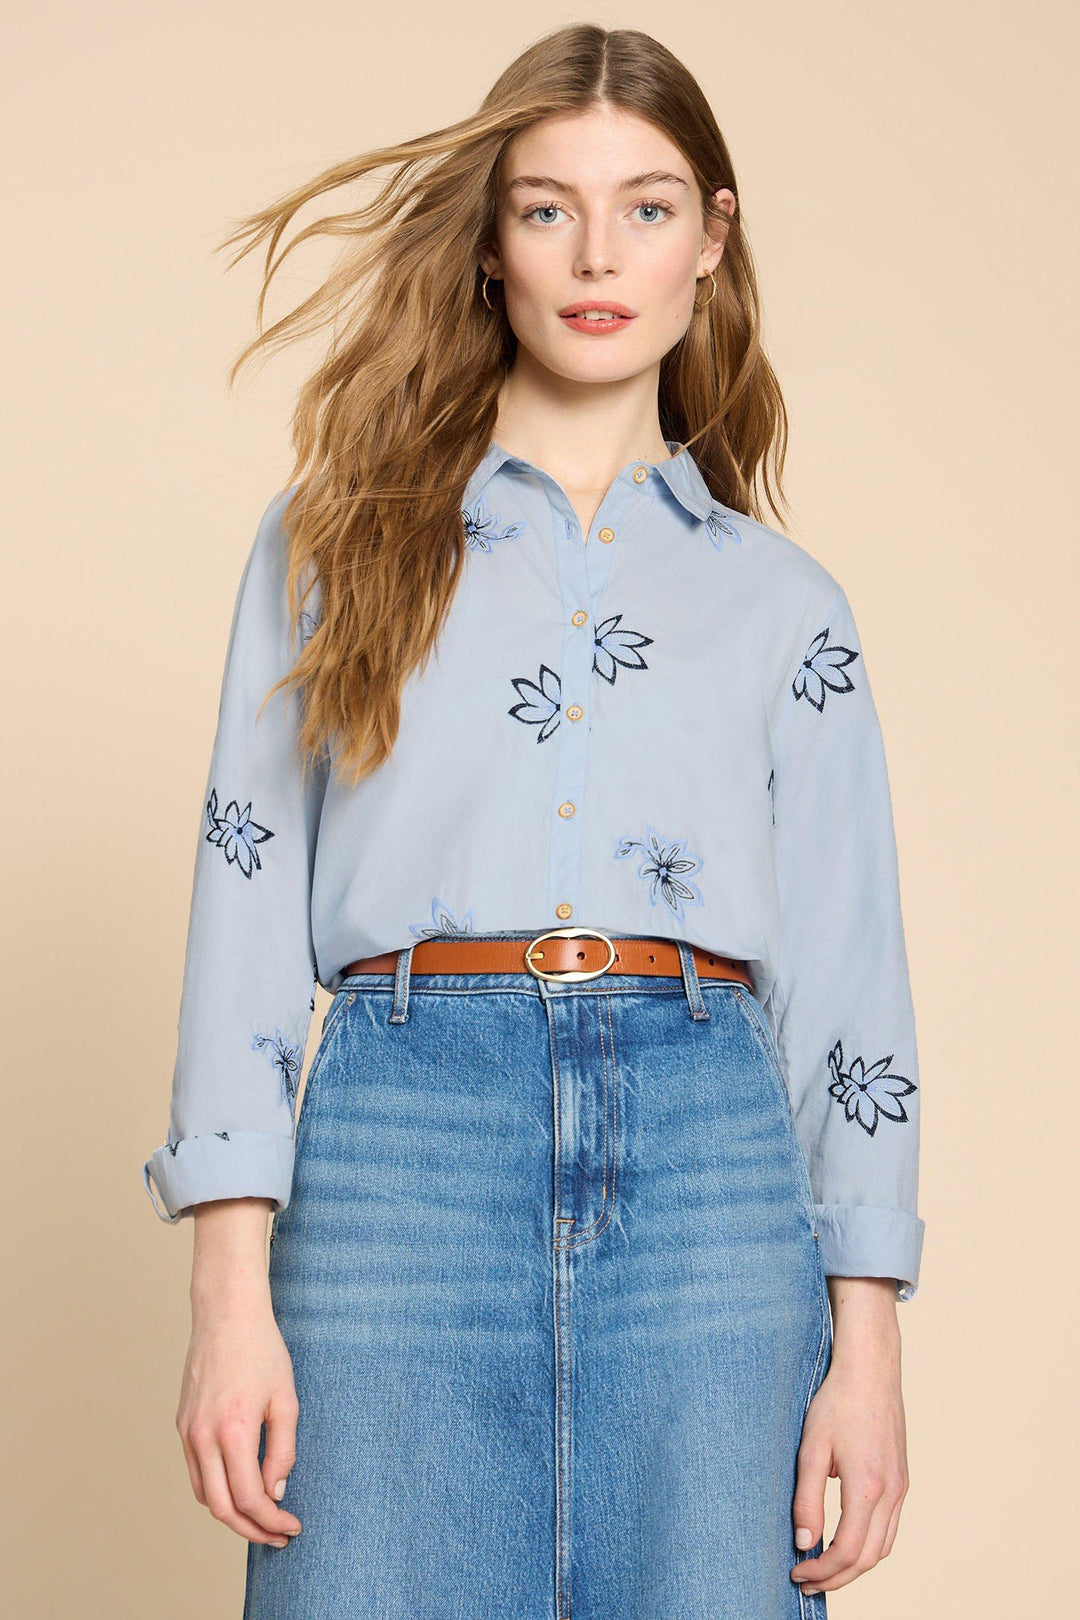 White Stuff 440421 Sophie Blue Embroidered Shirt - Shirley Allum Boutique